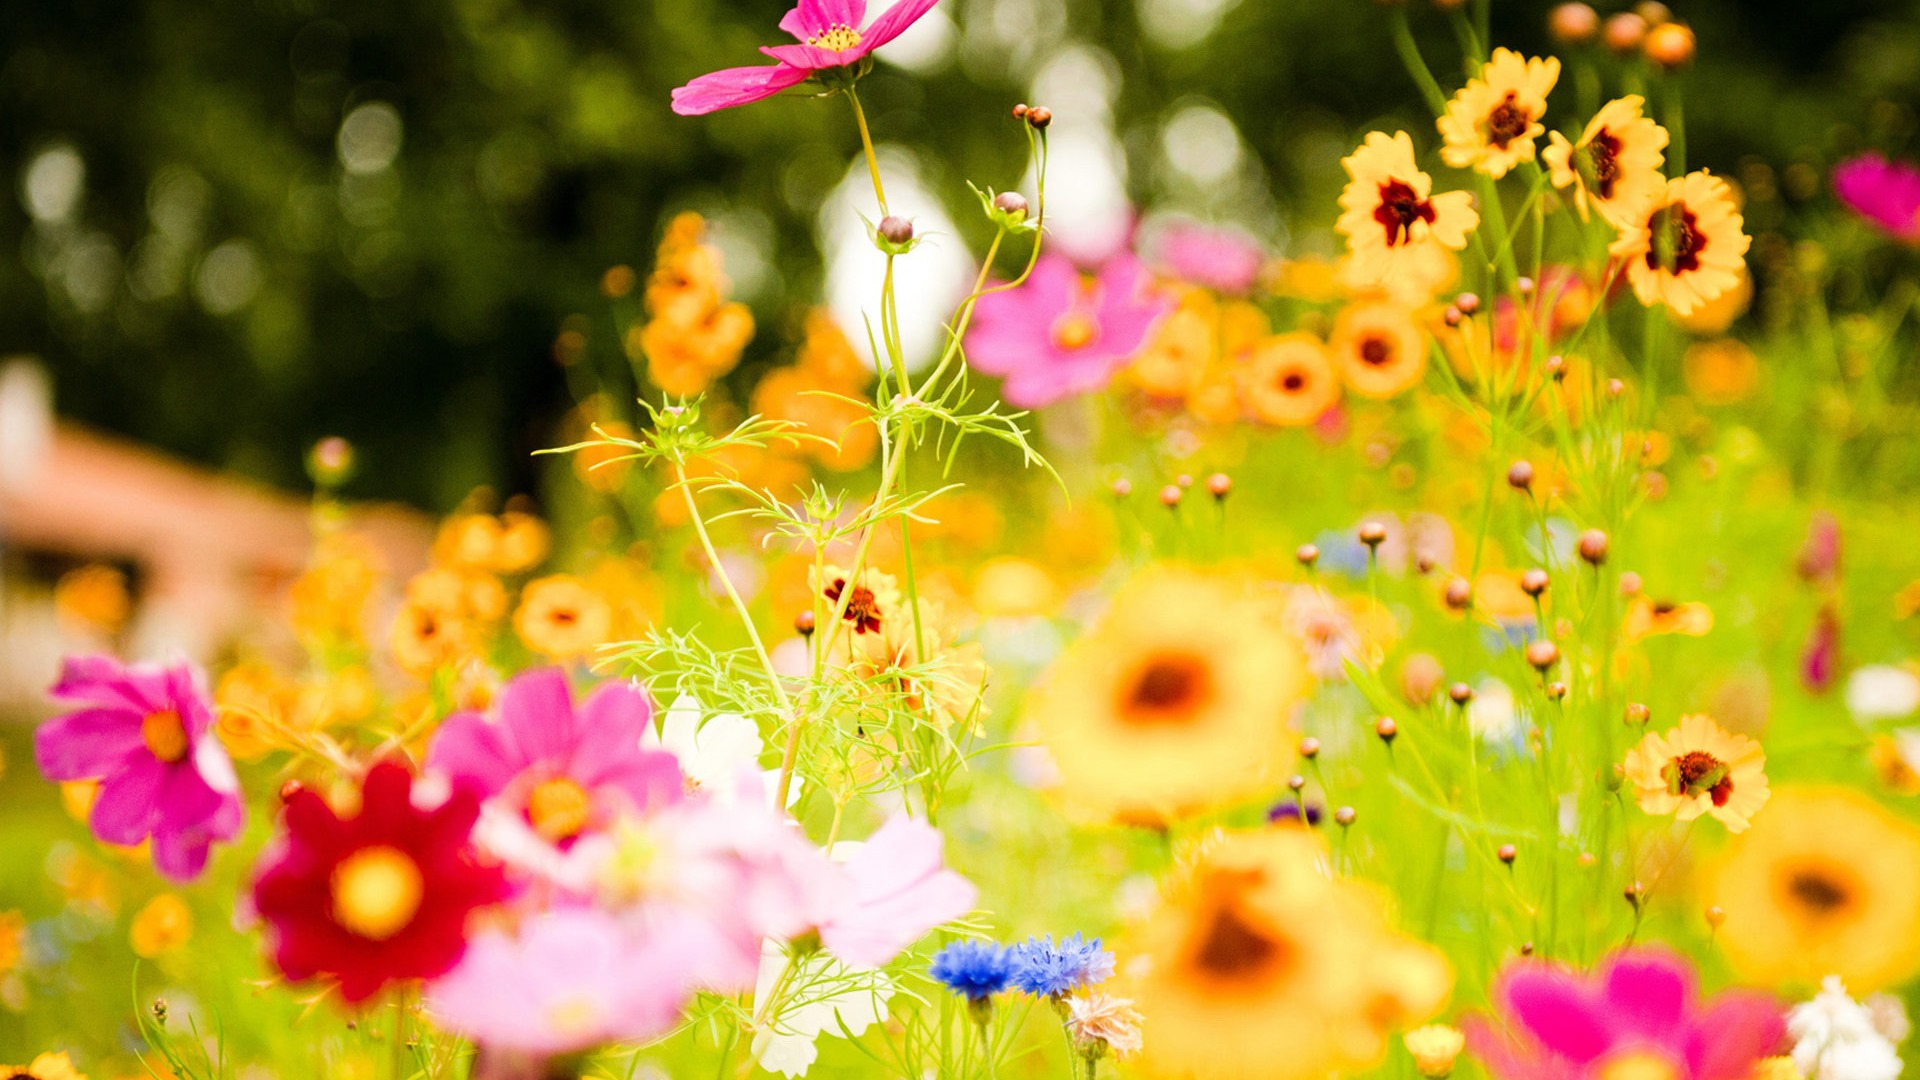 Fresh flowers and plants spring theme wallpapers #6 - 1920x1080